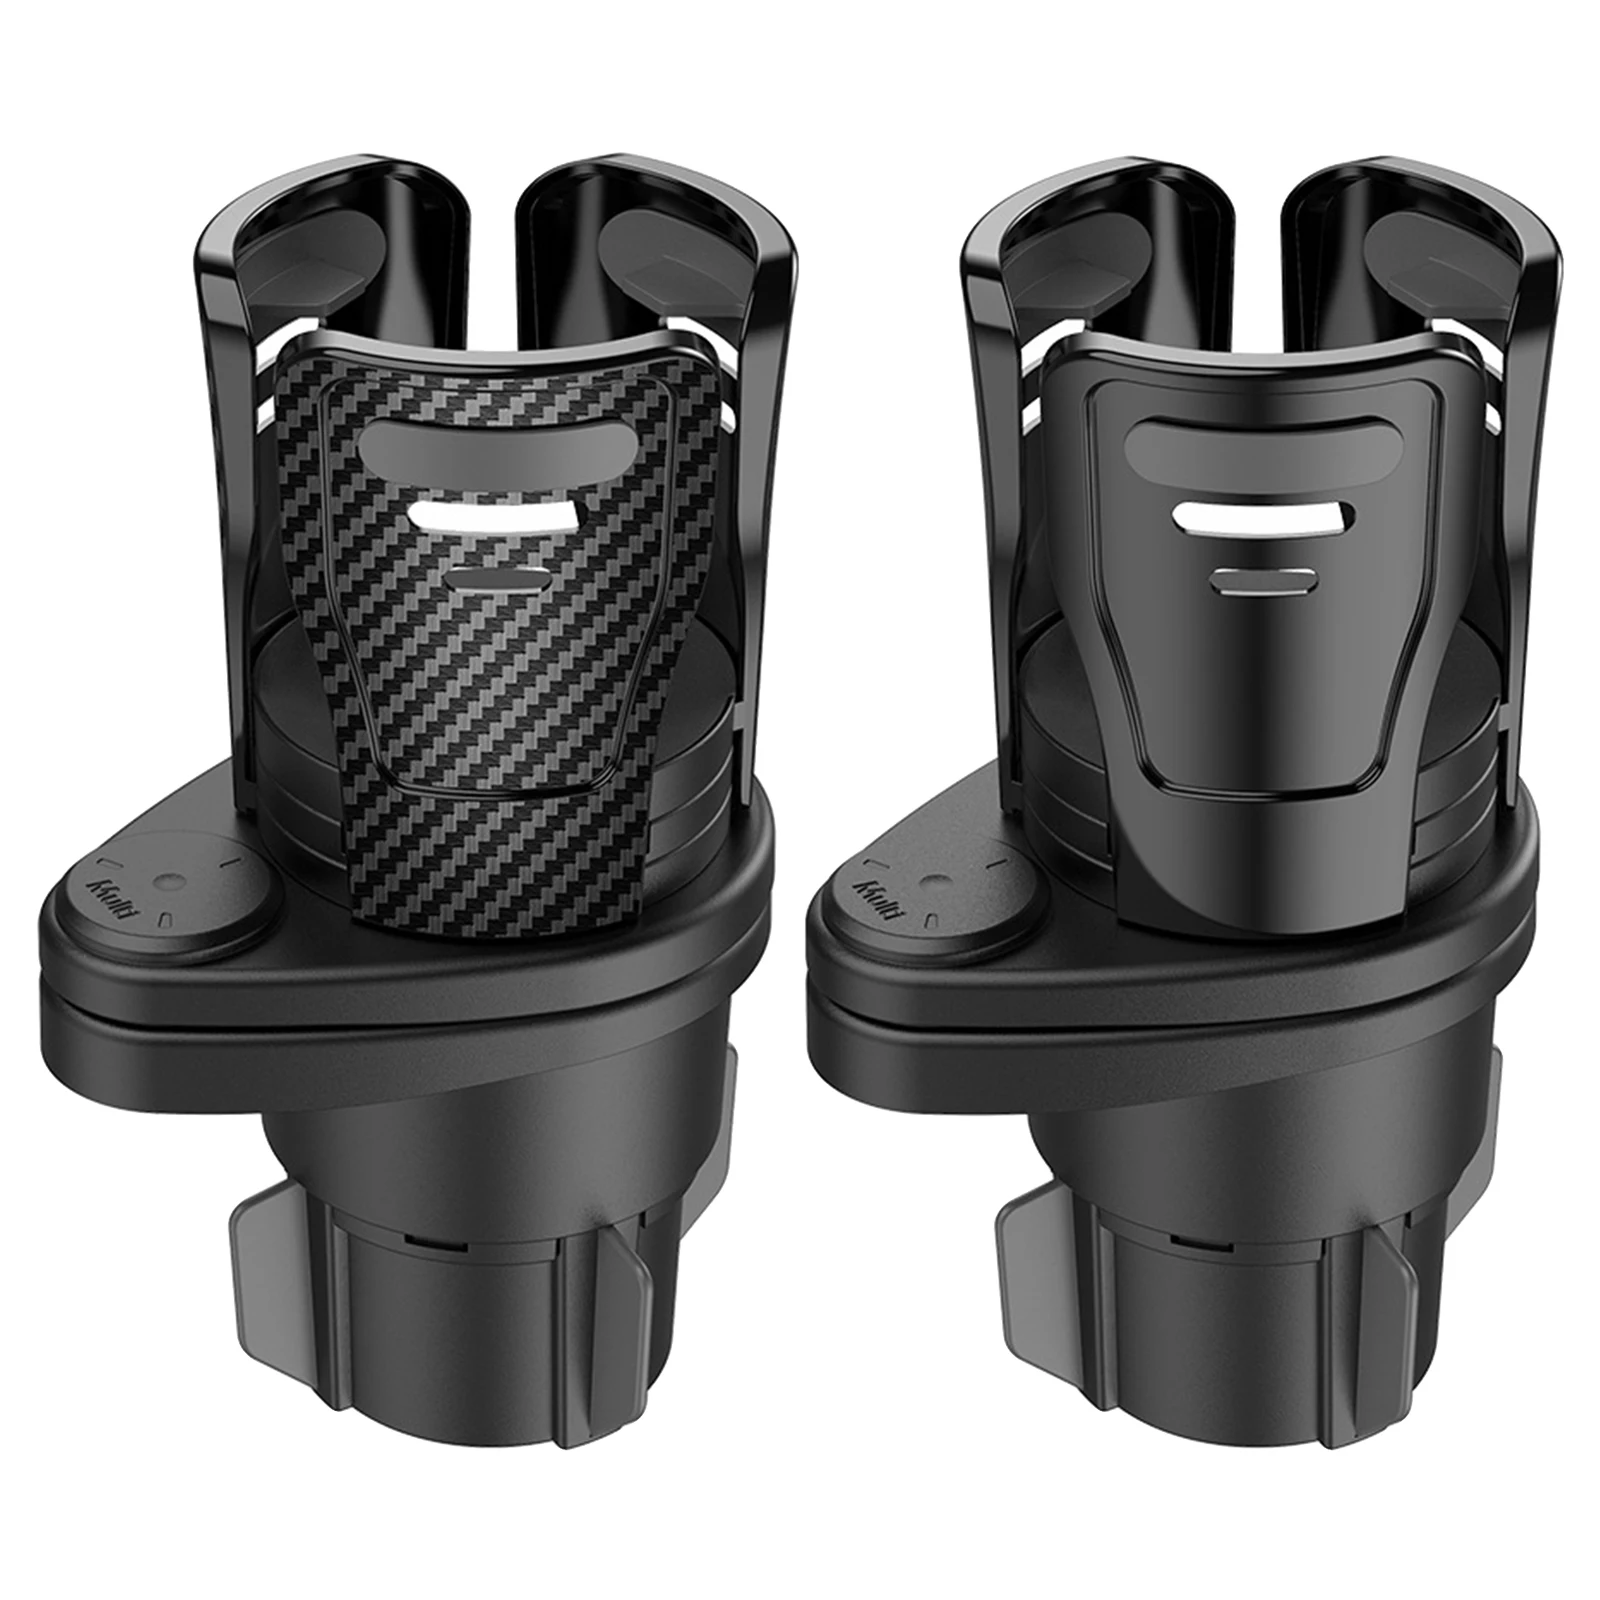 Vehicle-Mounted Car Cup Holder Expander Cups Stand 360 Rotating Multifunctional Water Cup Drink Holder Organizers Stable